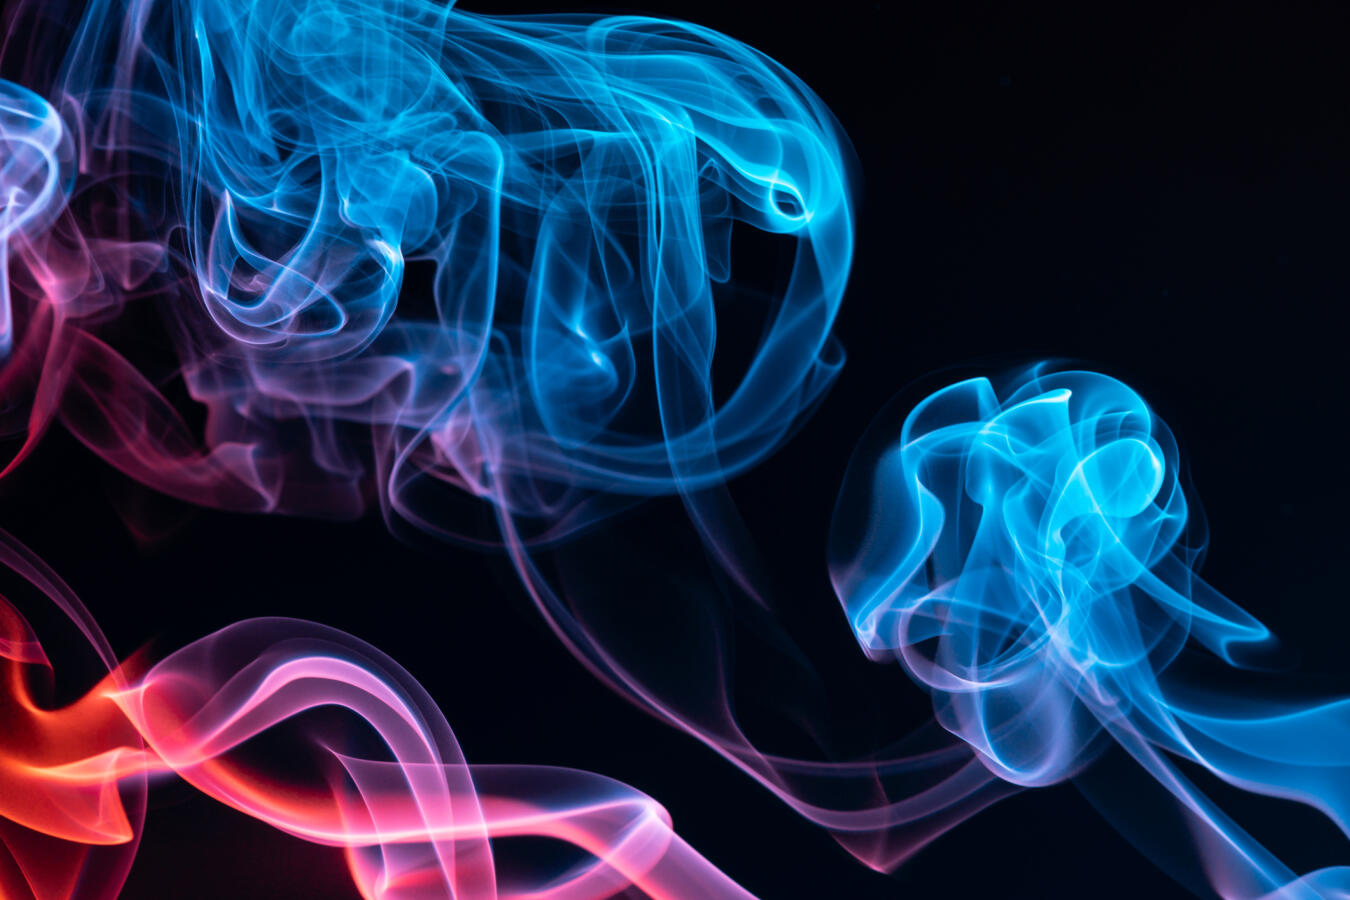 Colorful steam on a black background.